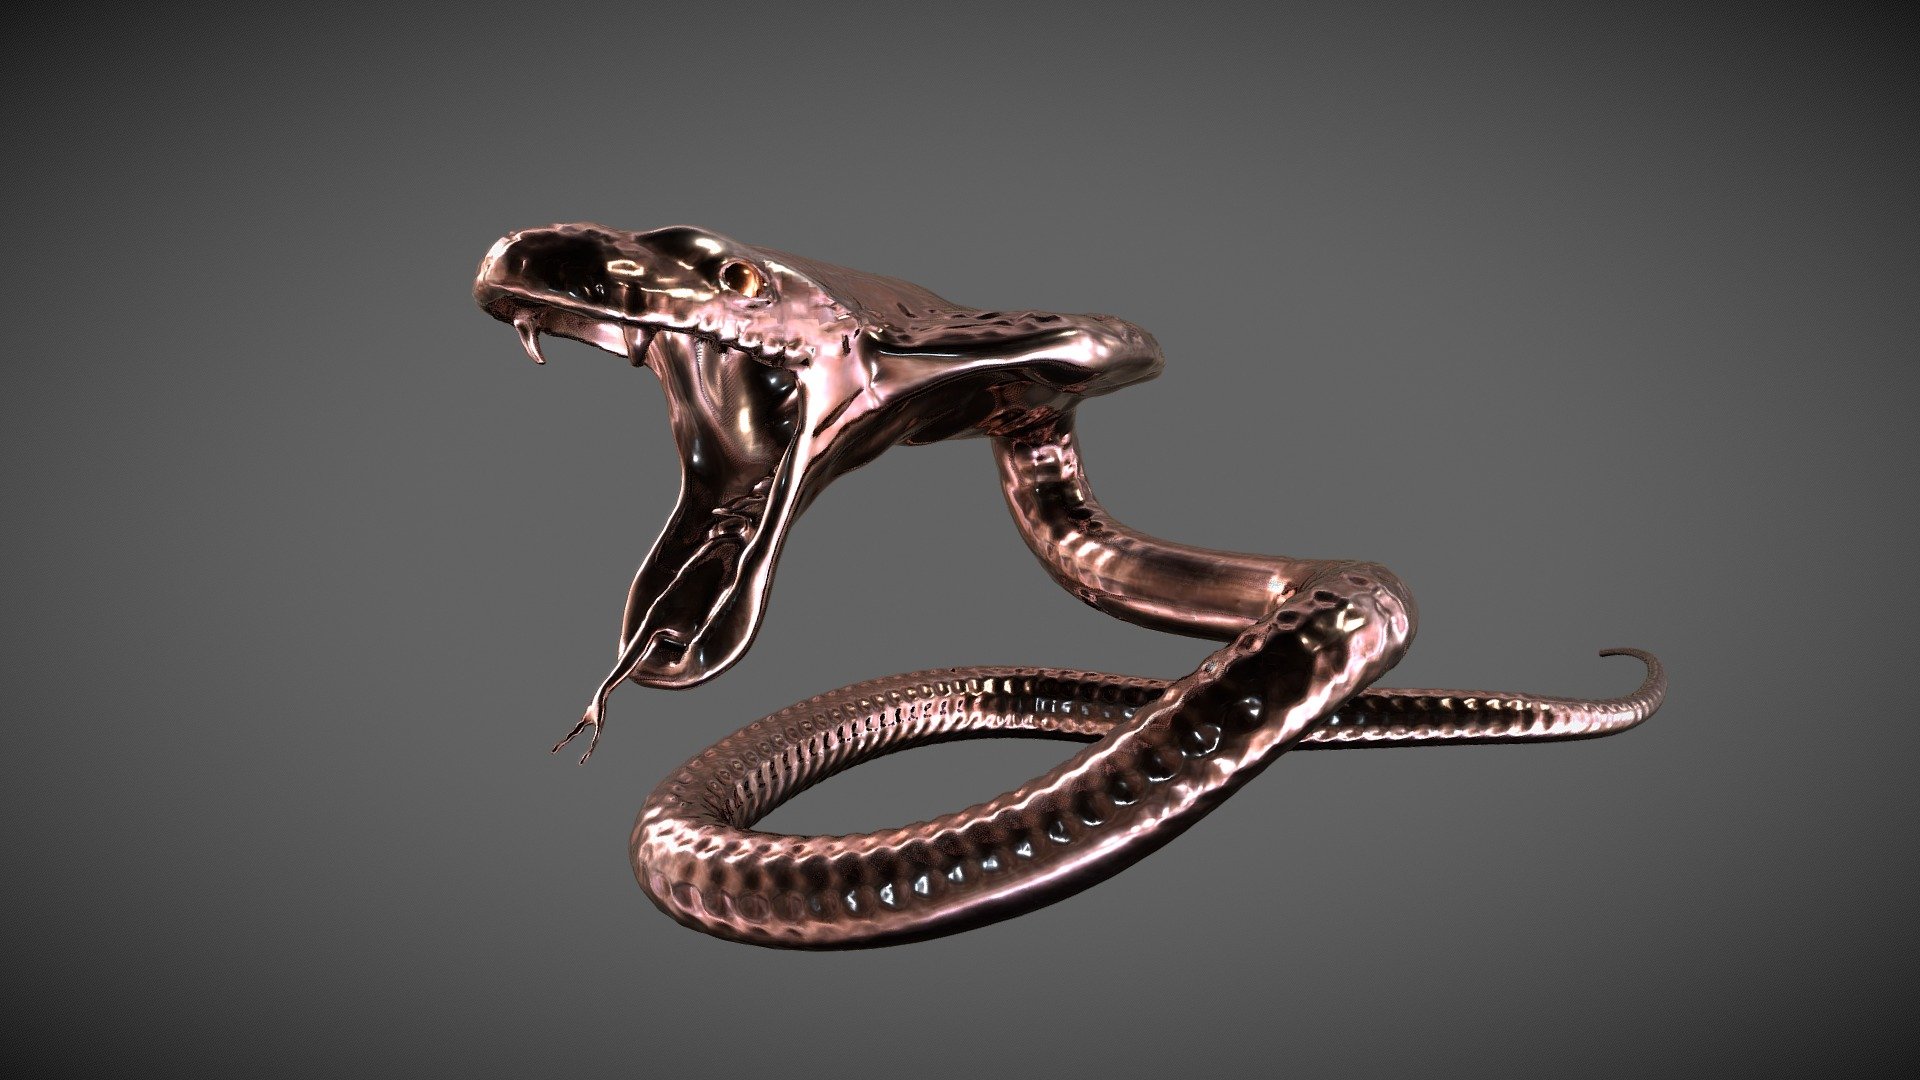 A metal snake made in blender. Super free! Have fun with it.
Throw a like if you download or
Check out my other free assets!
Cheers! - Metal Snake - Buy Royalty Free 3D model by Filip (@filip.hans.nyberg) 3d model